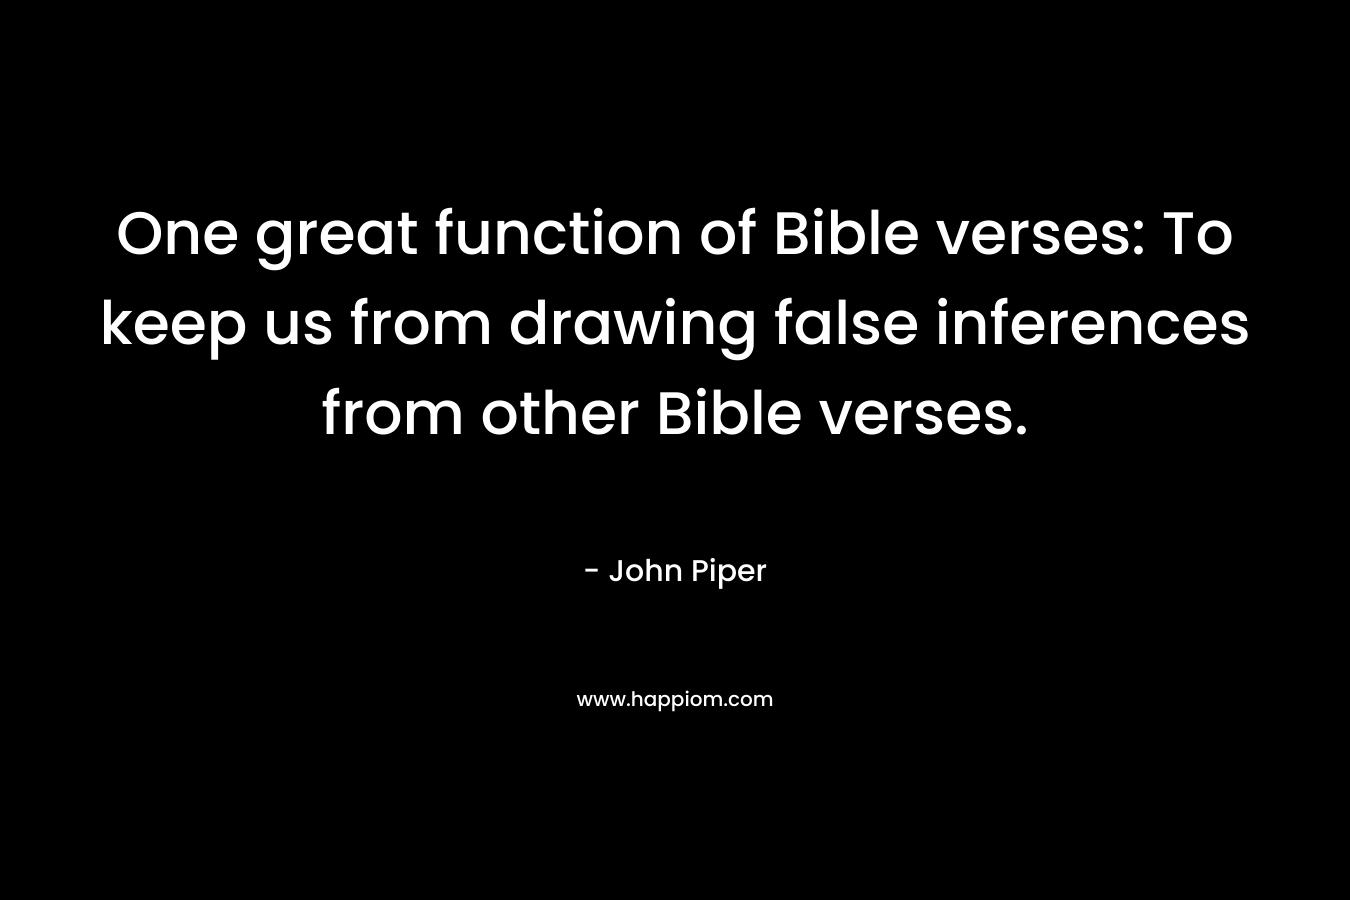 One great function of Bible verses: To keep us from drawing false inferences from other Bible verses.